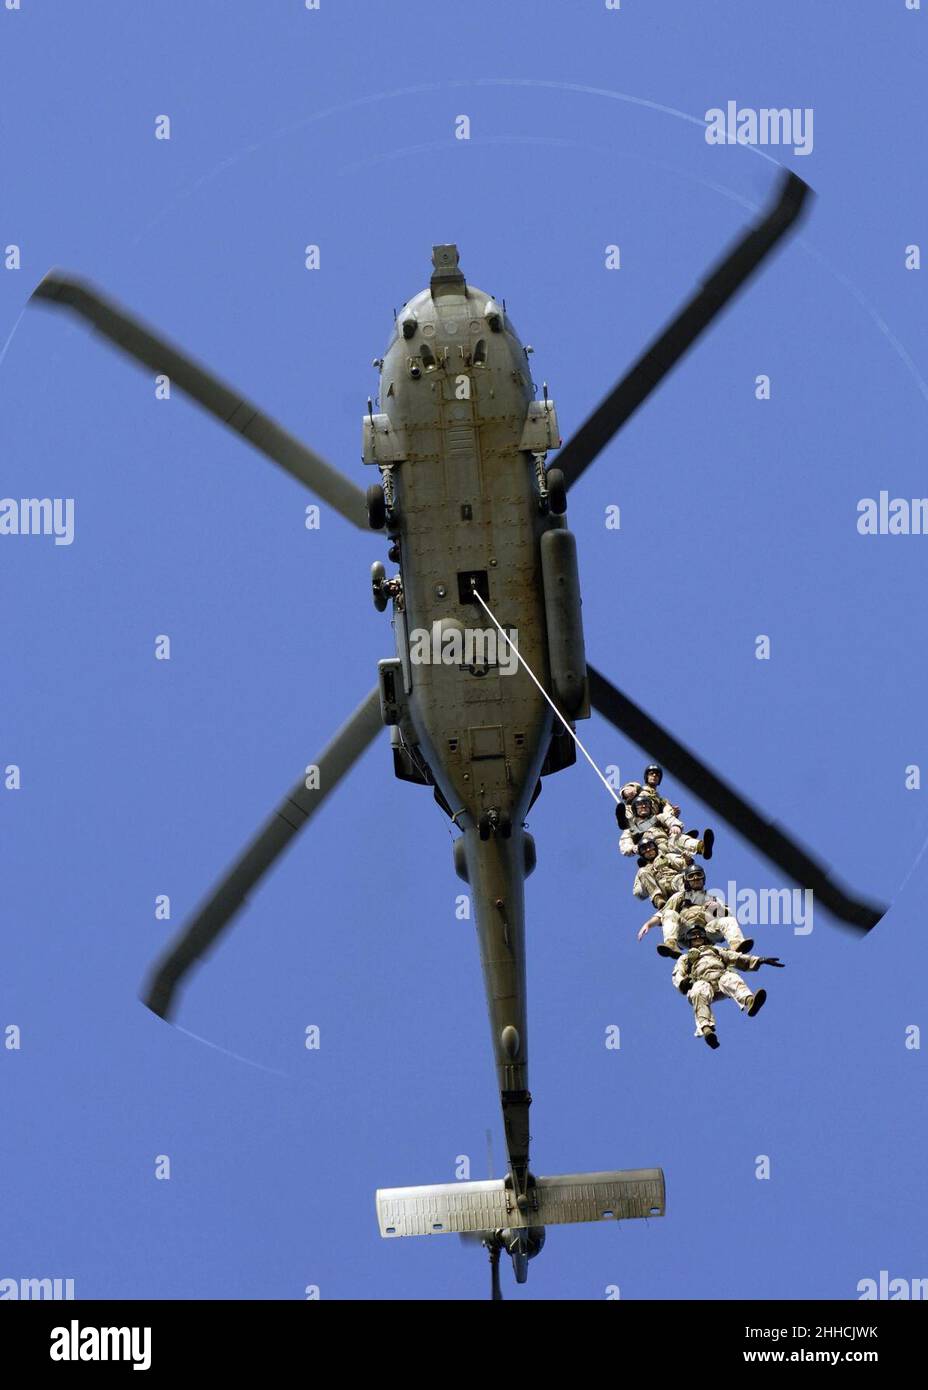 Special Purpose Insertion Extraction SPIE. Stock Photo